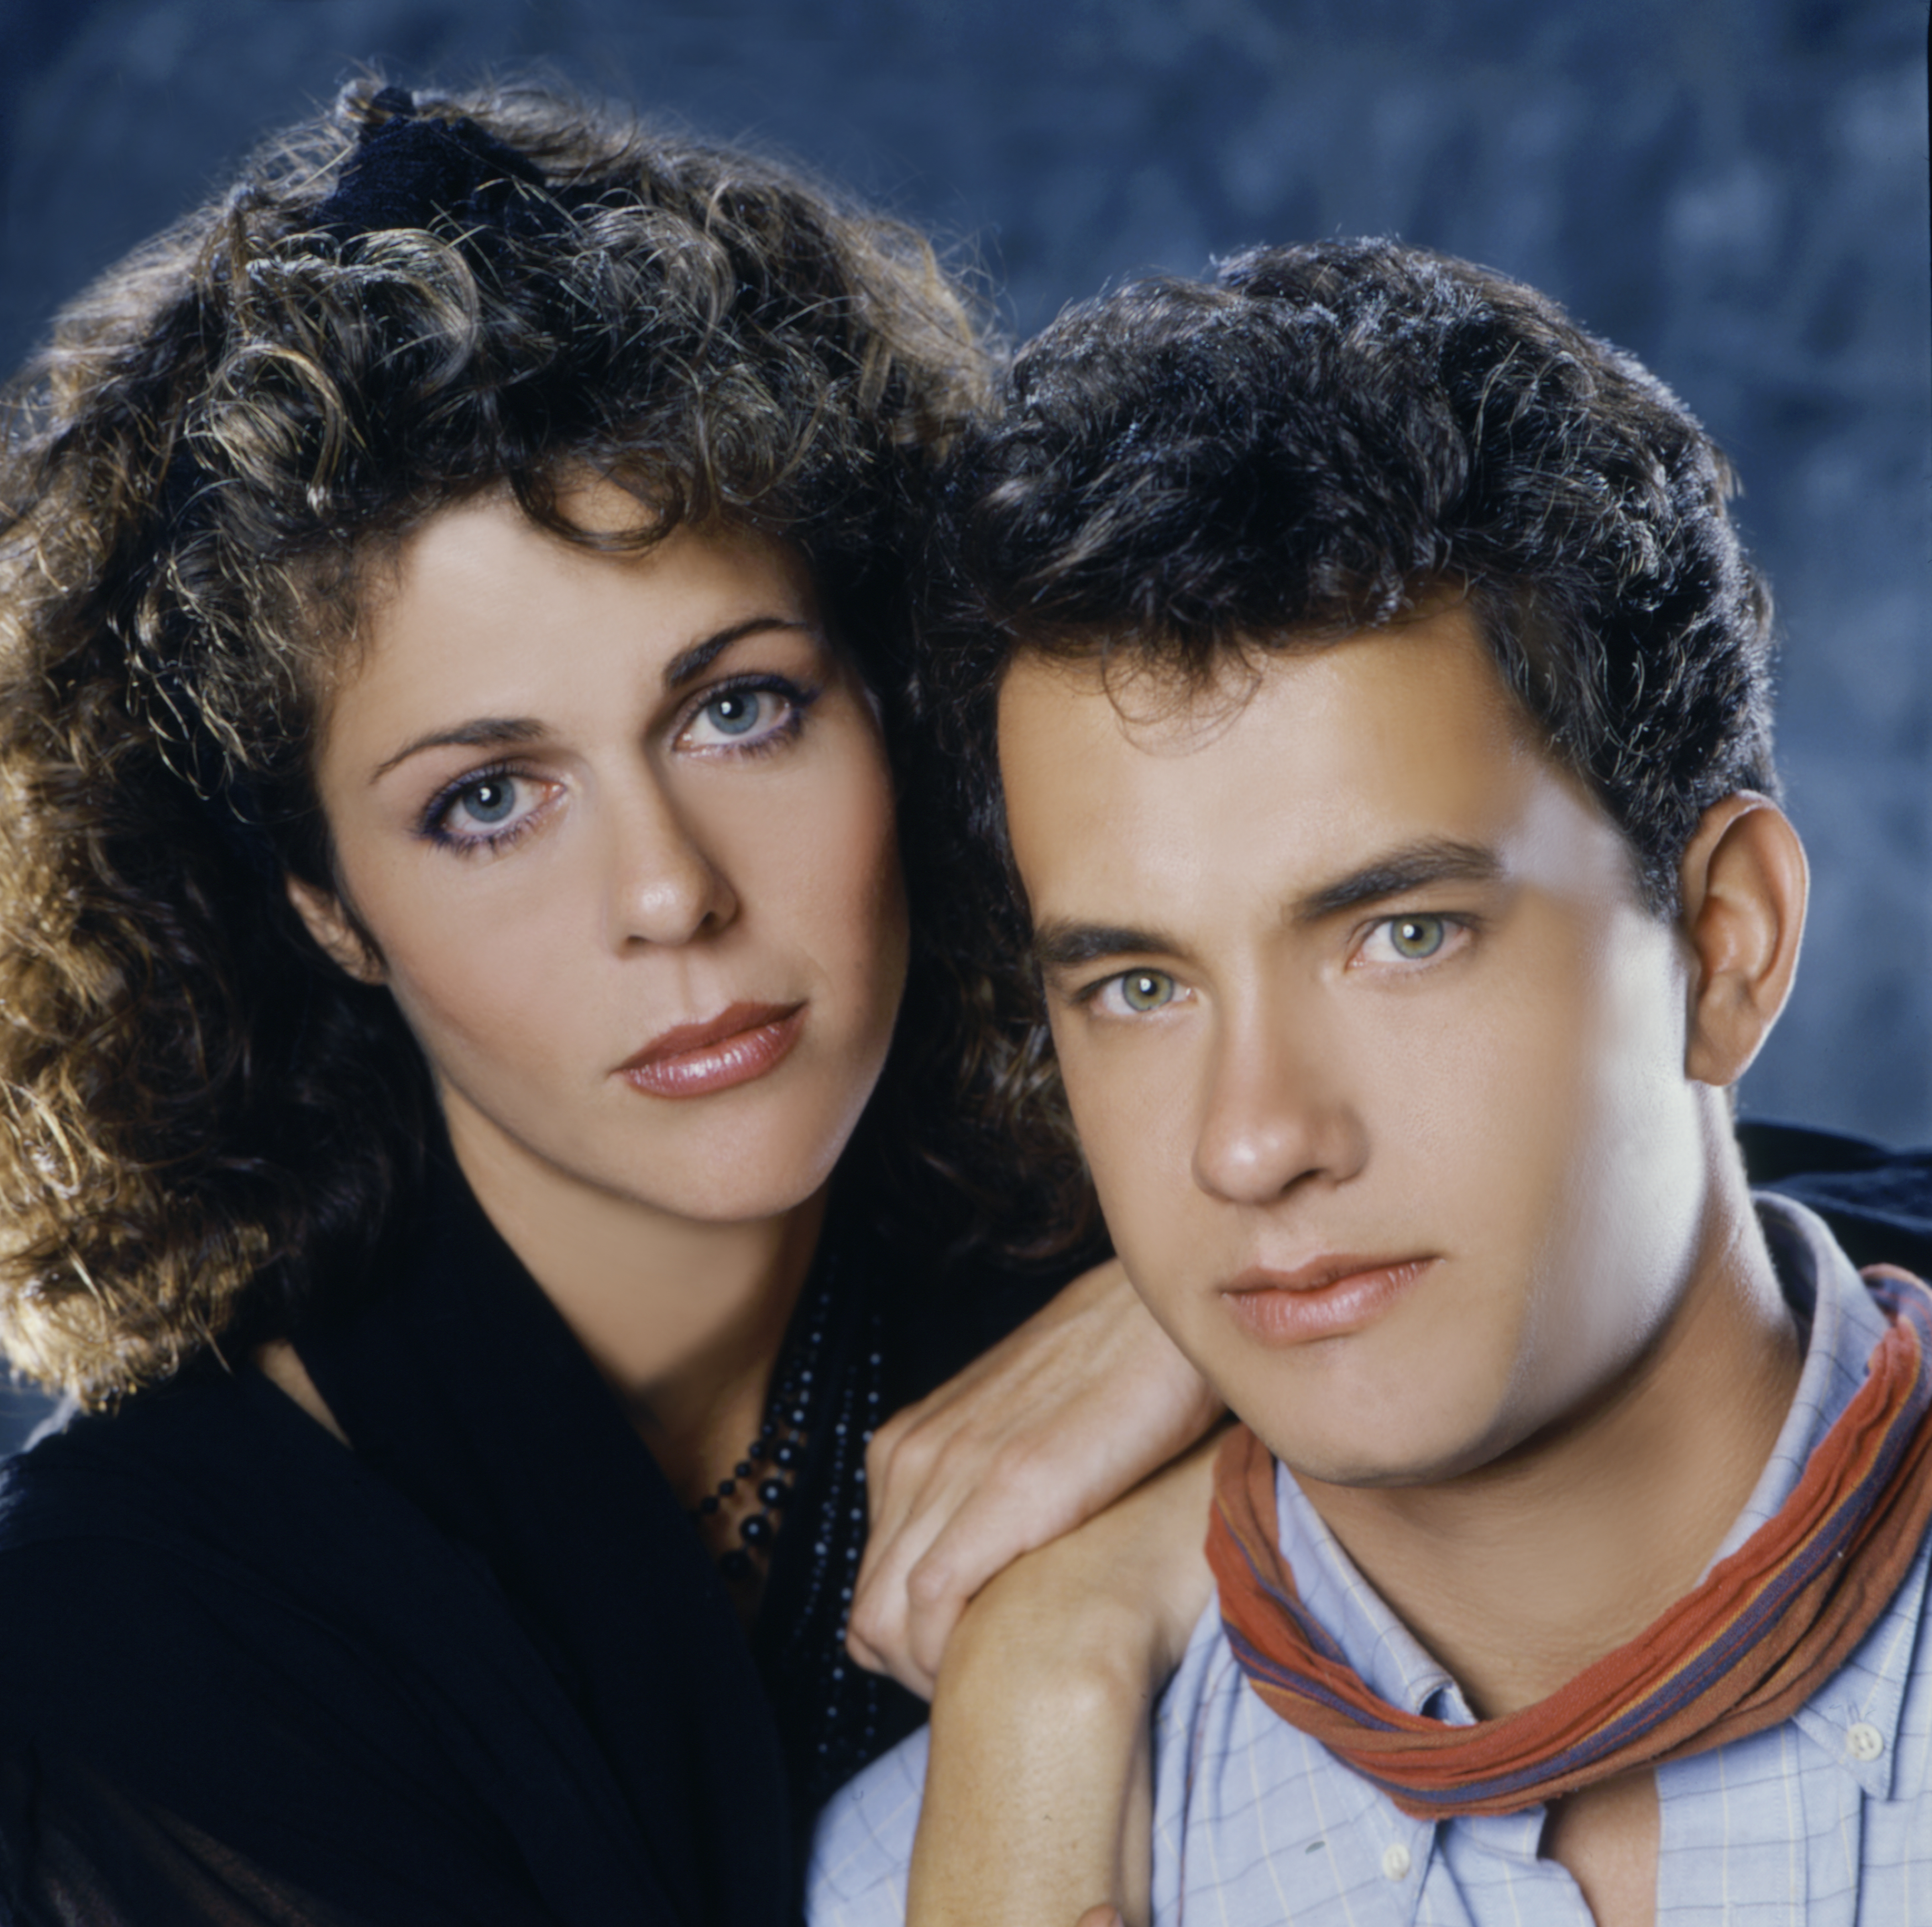 Rita Wilson and Tom Hanks during the filming of "Volunteers" in 1985 | Source: Getty Images